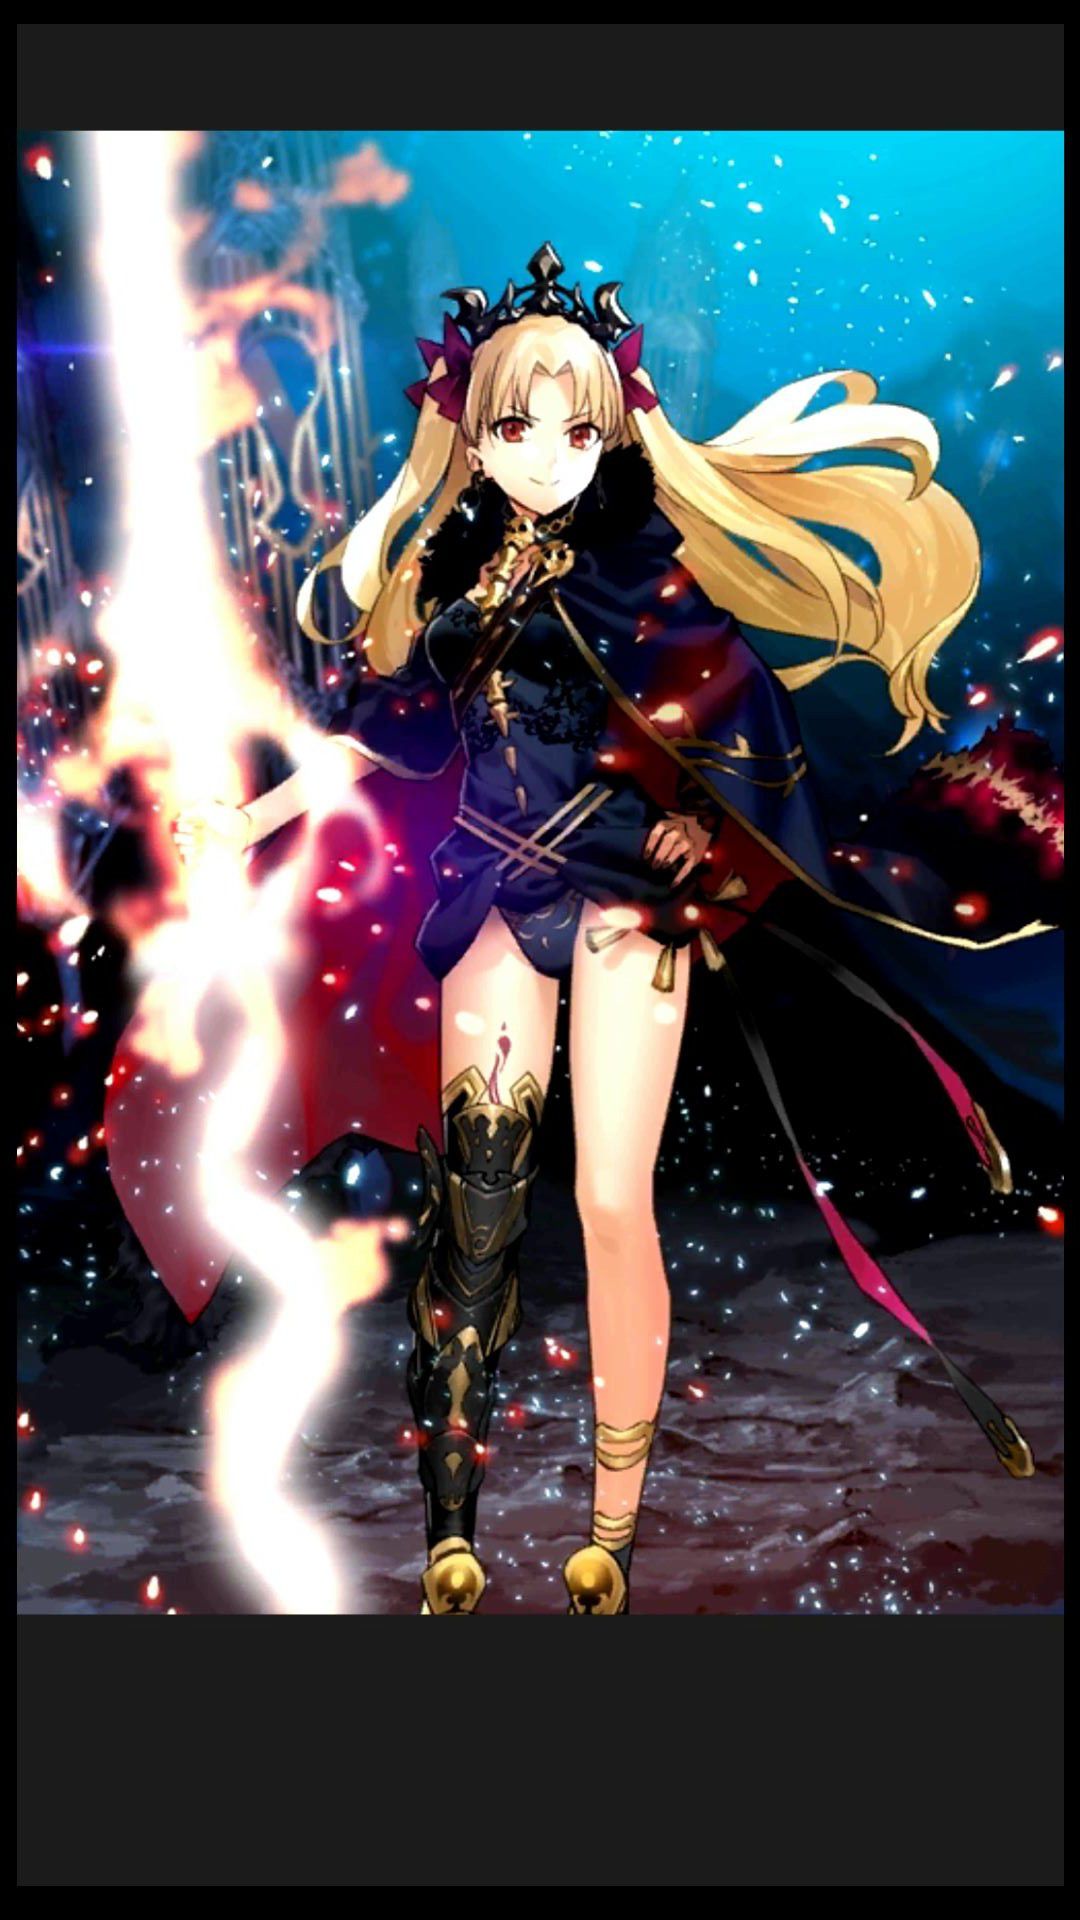 [Fate/Grand order] The final second coming illustrations cute Ereshkigal transcendence! 5